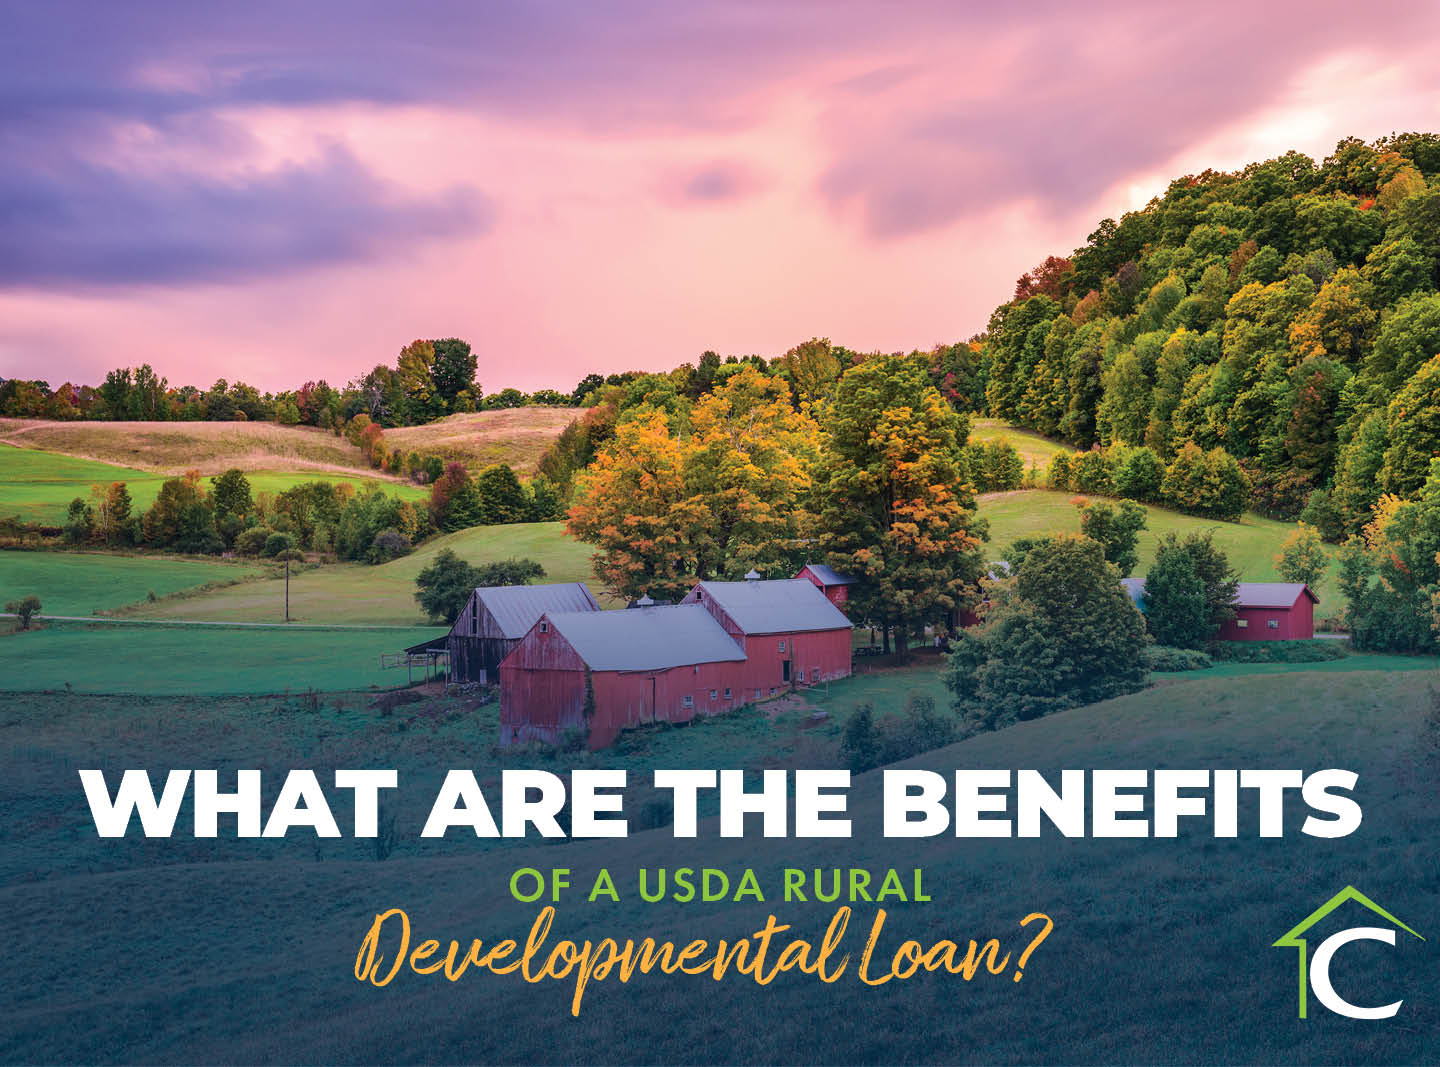 What Are the Benefits of a USDA Rural Development Loan?